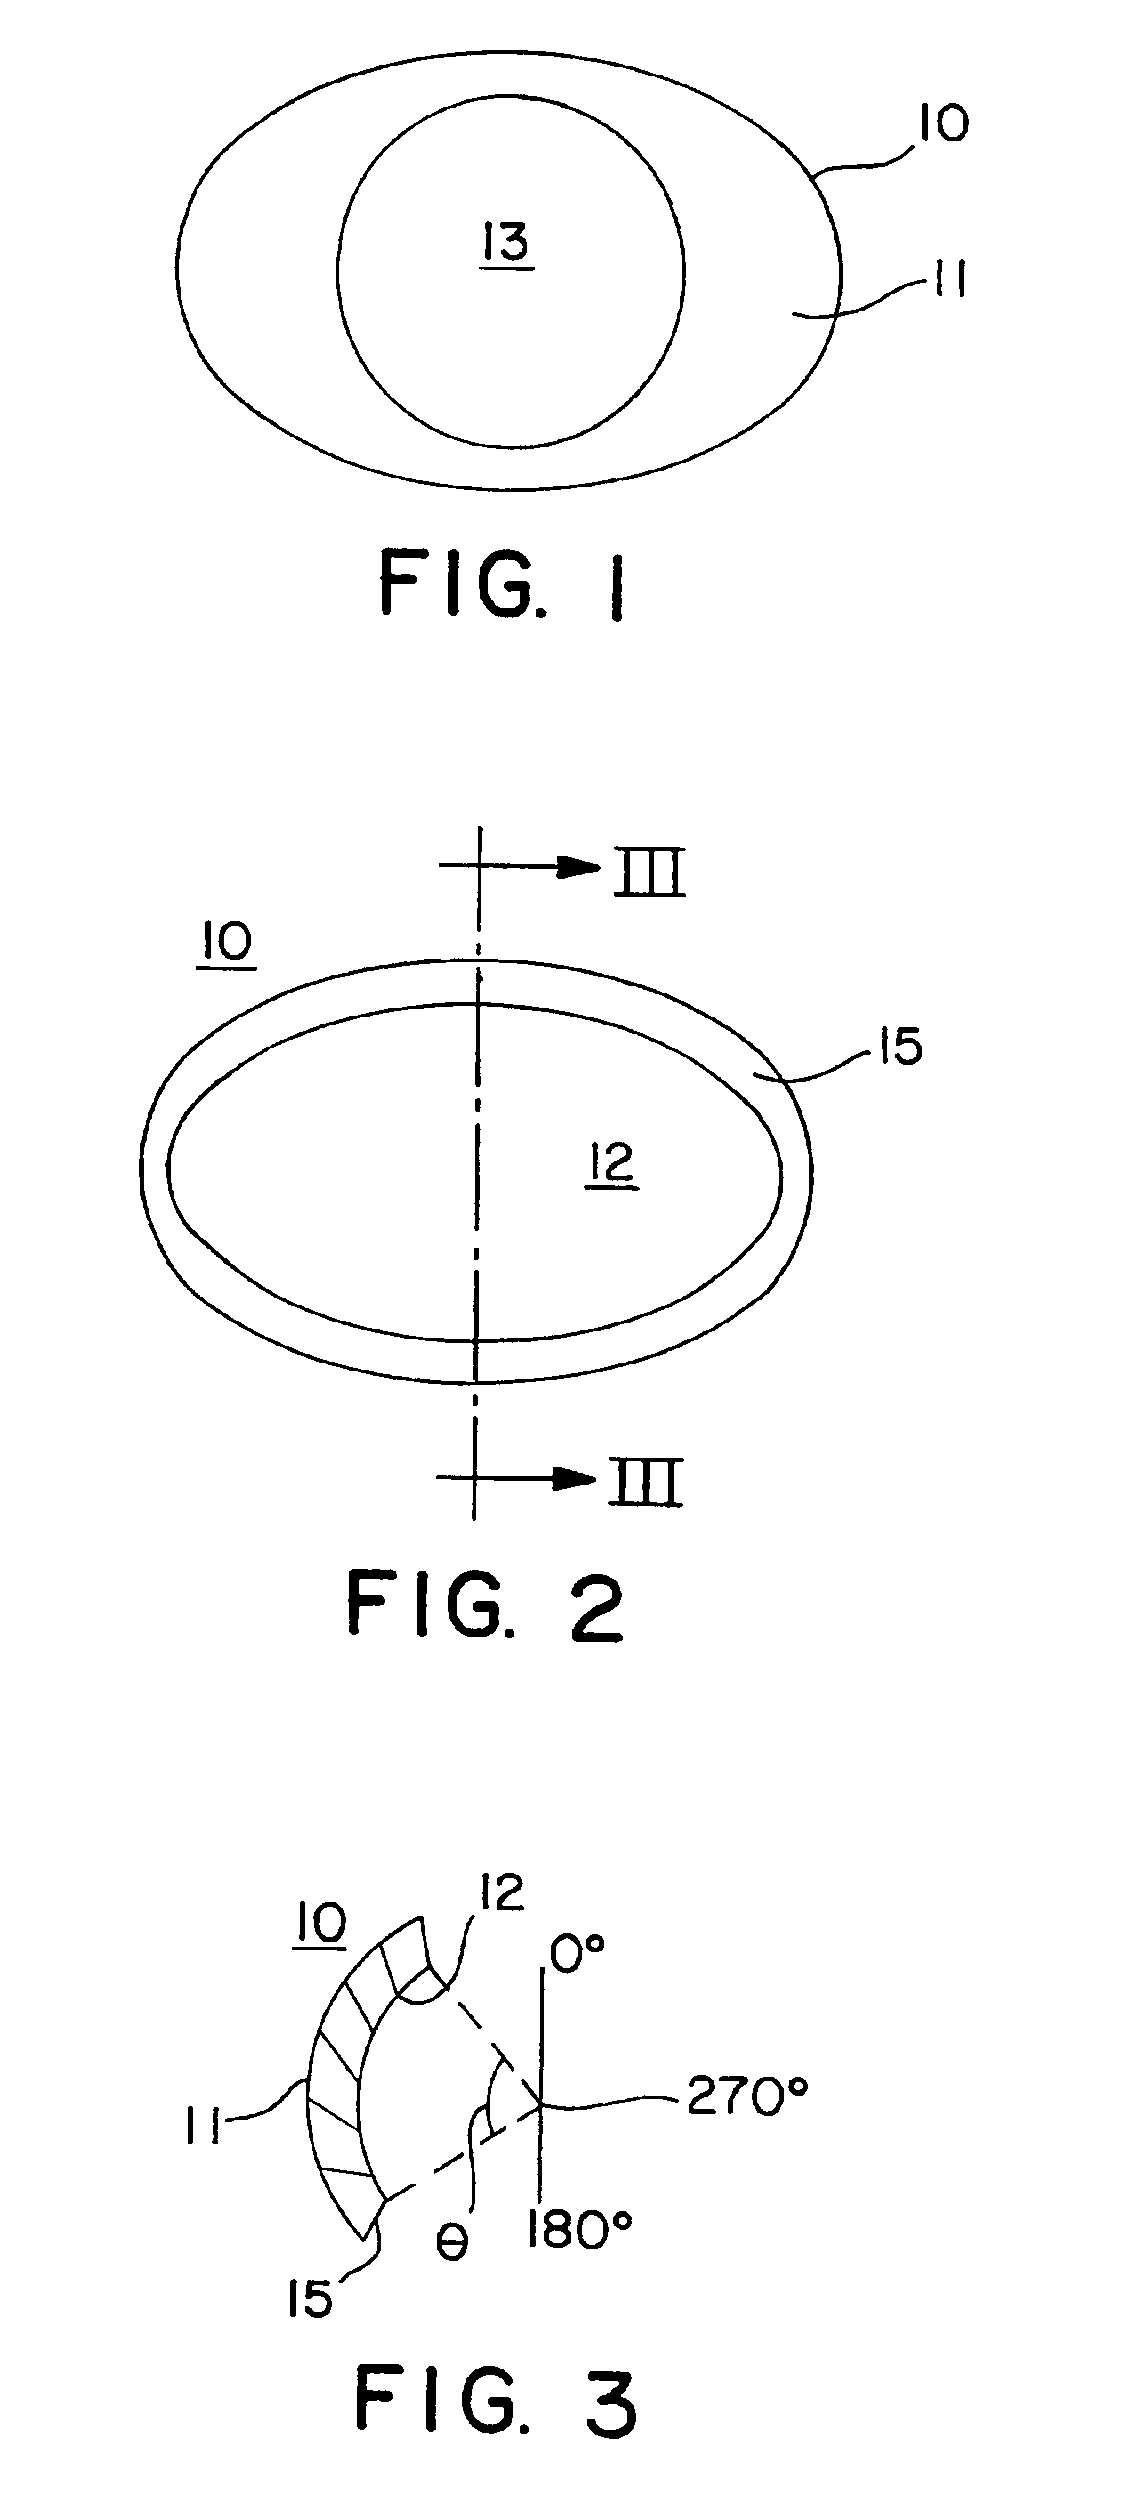 Manikin and eye device apparatus, methods and articles of manufacture